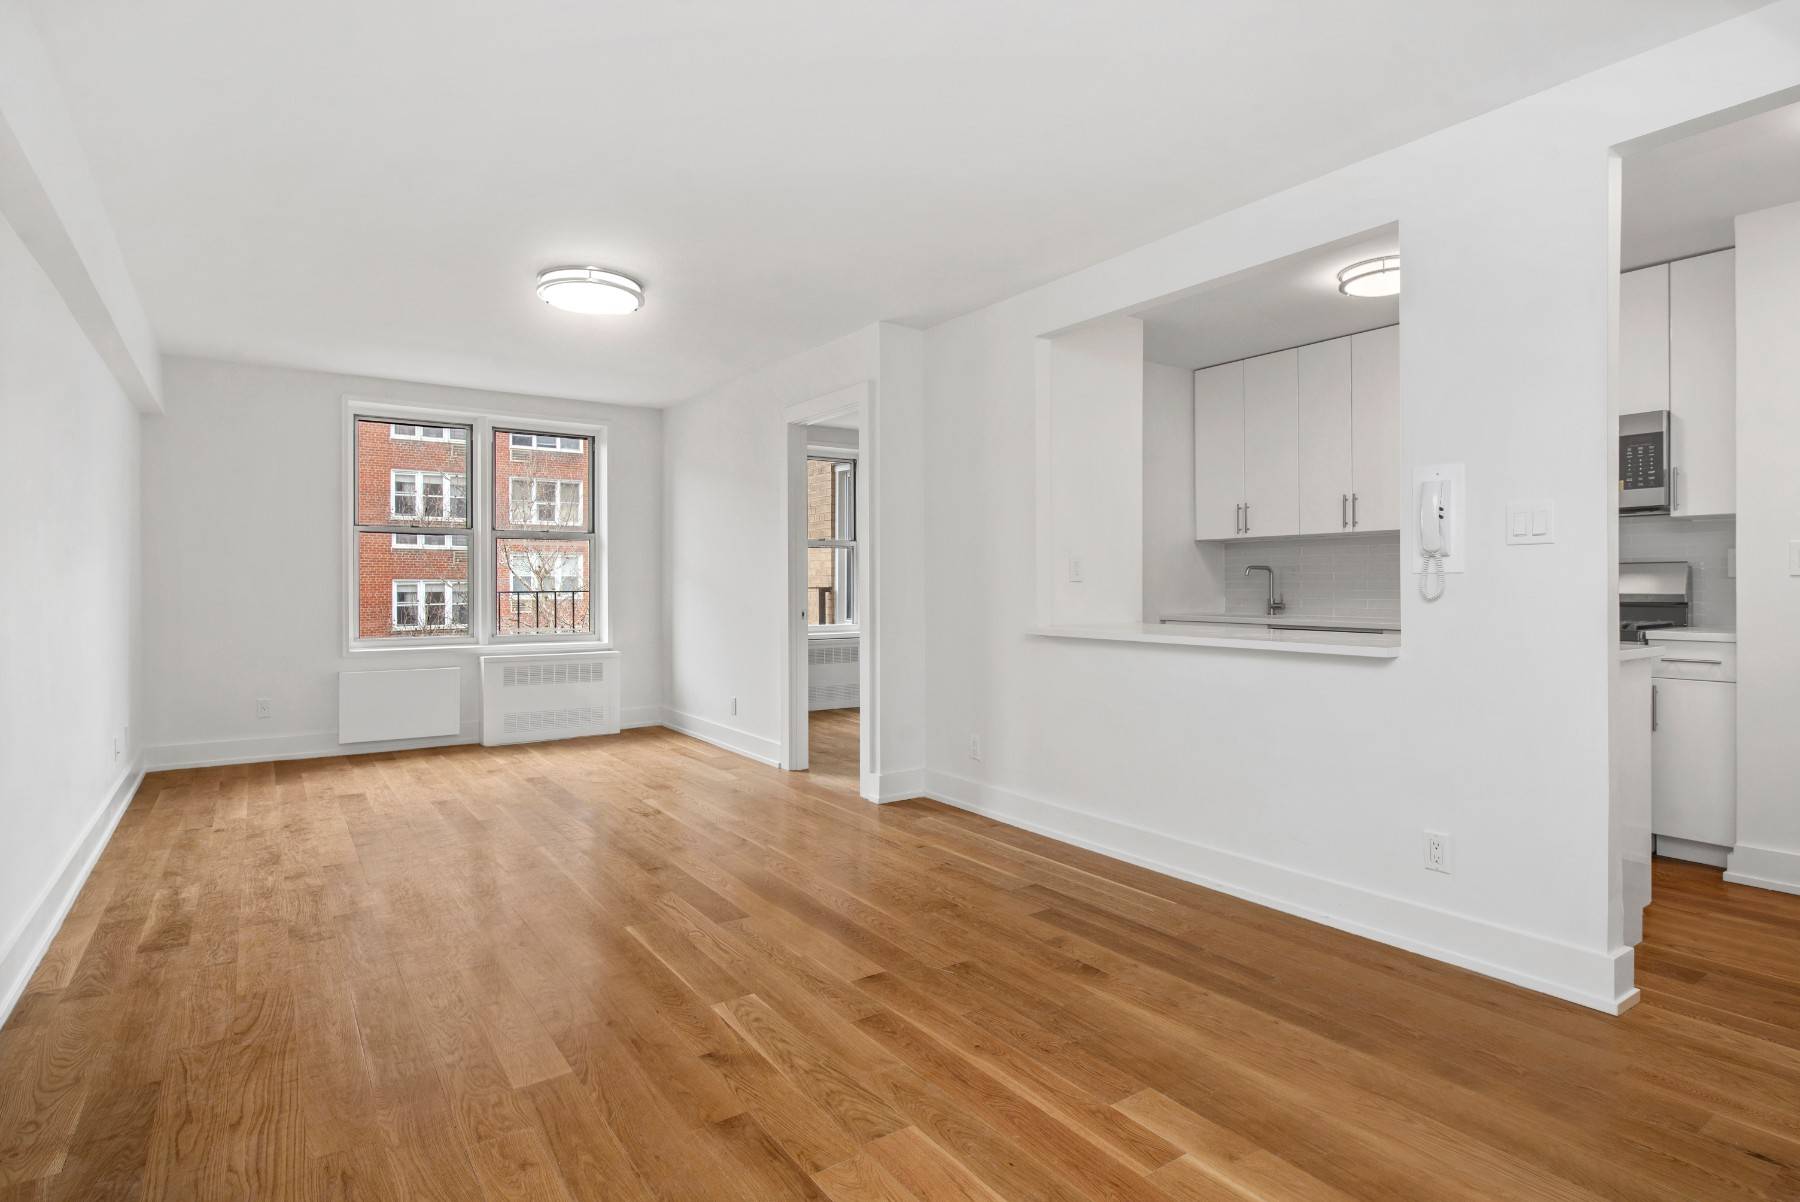 This modern, gut renovated two bedroom apartment features new oak hardwood floors, a spacious living room, separate kitchen with stainless steel appliances which include a microwave, stove, dishwasher, and refrigerator, ...